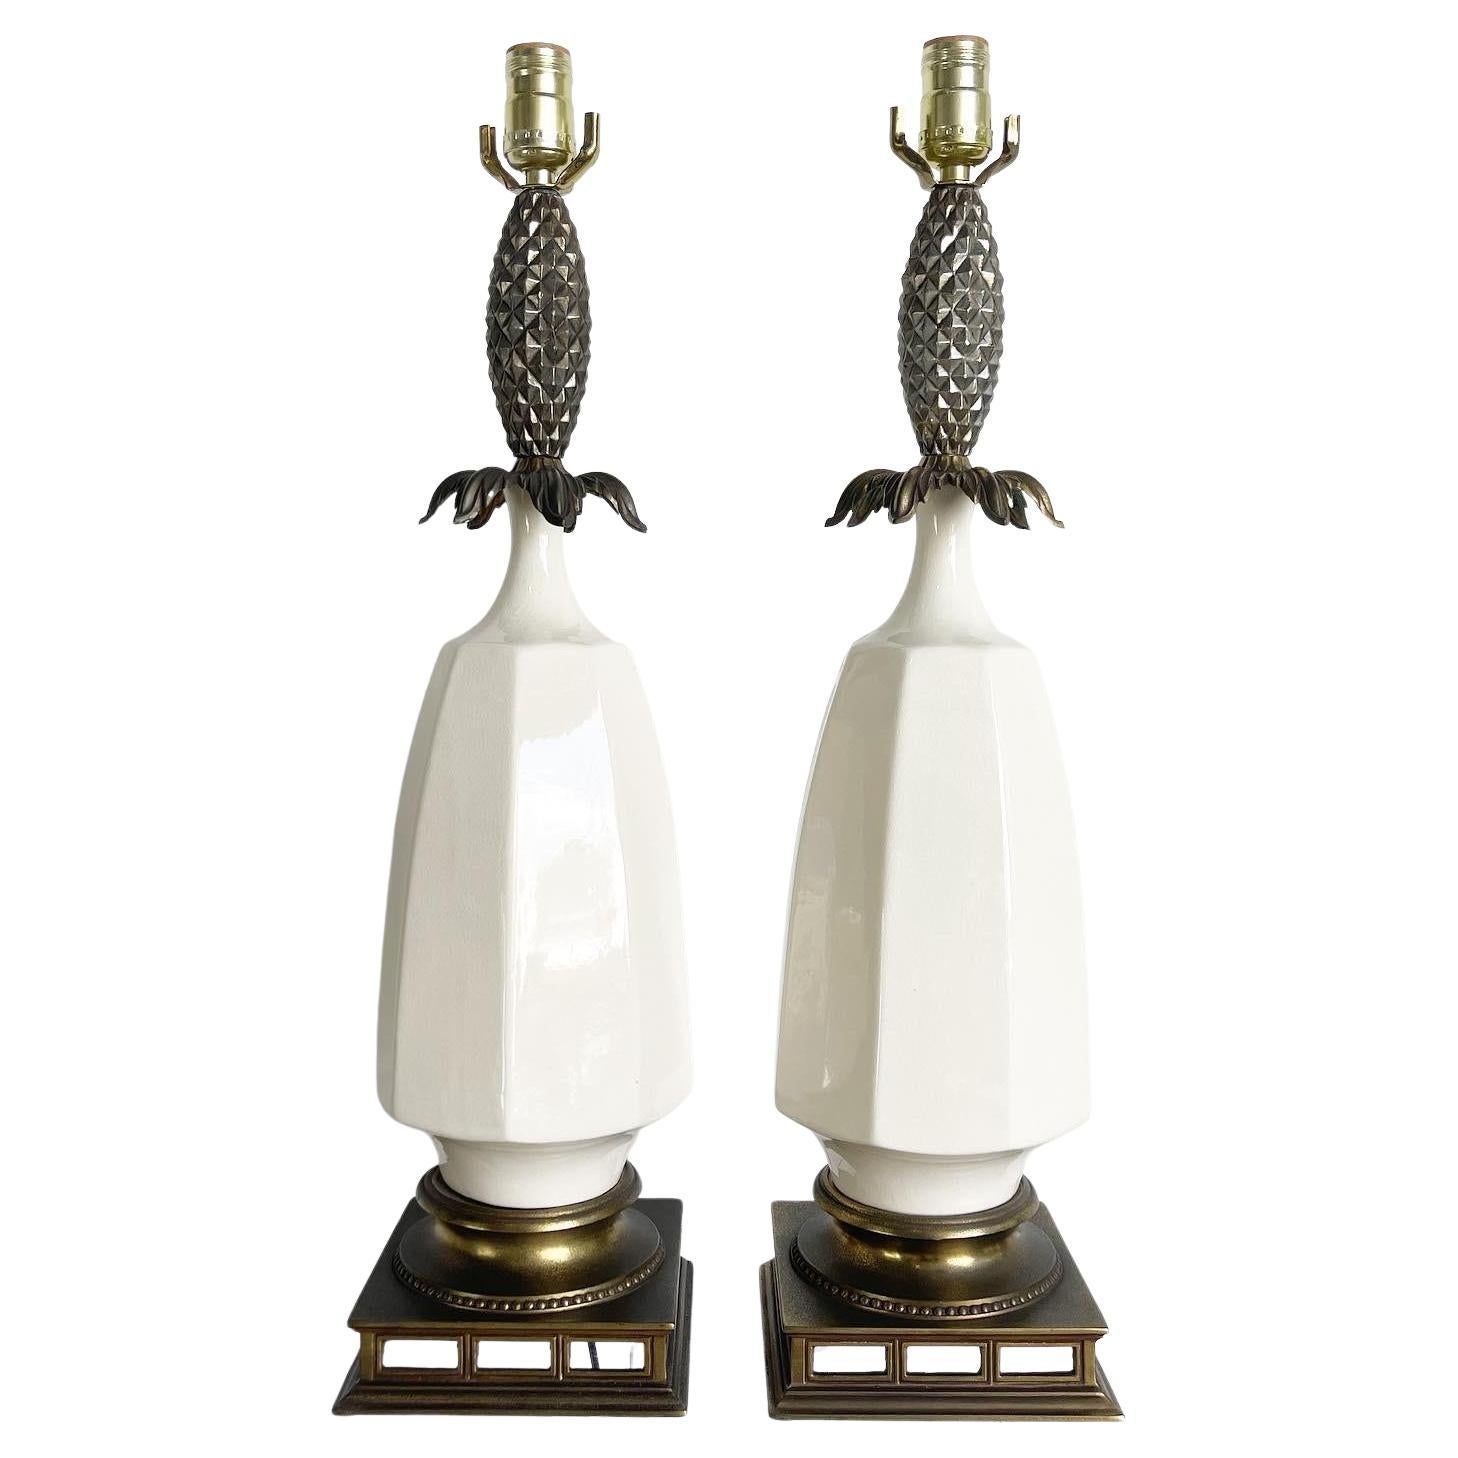 Hollywood Regency Creams Ceramic and Brass Pineapple Table Lamps - a Pair For Sale